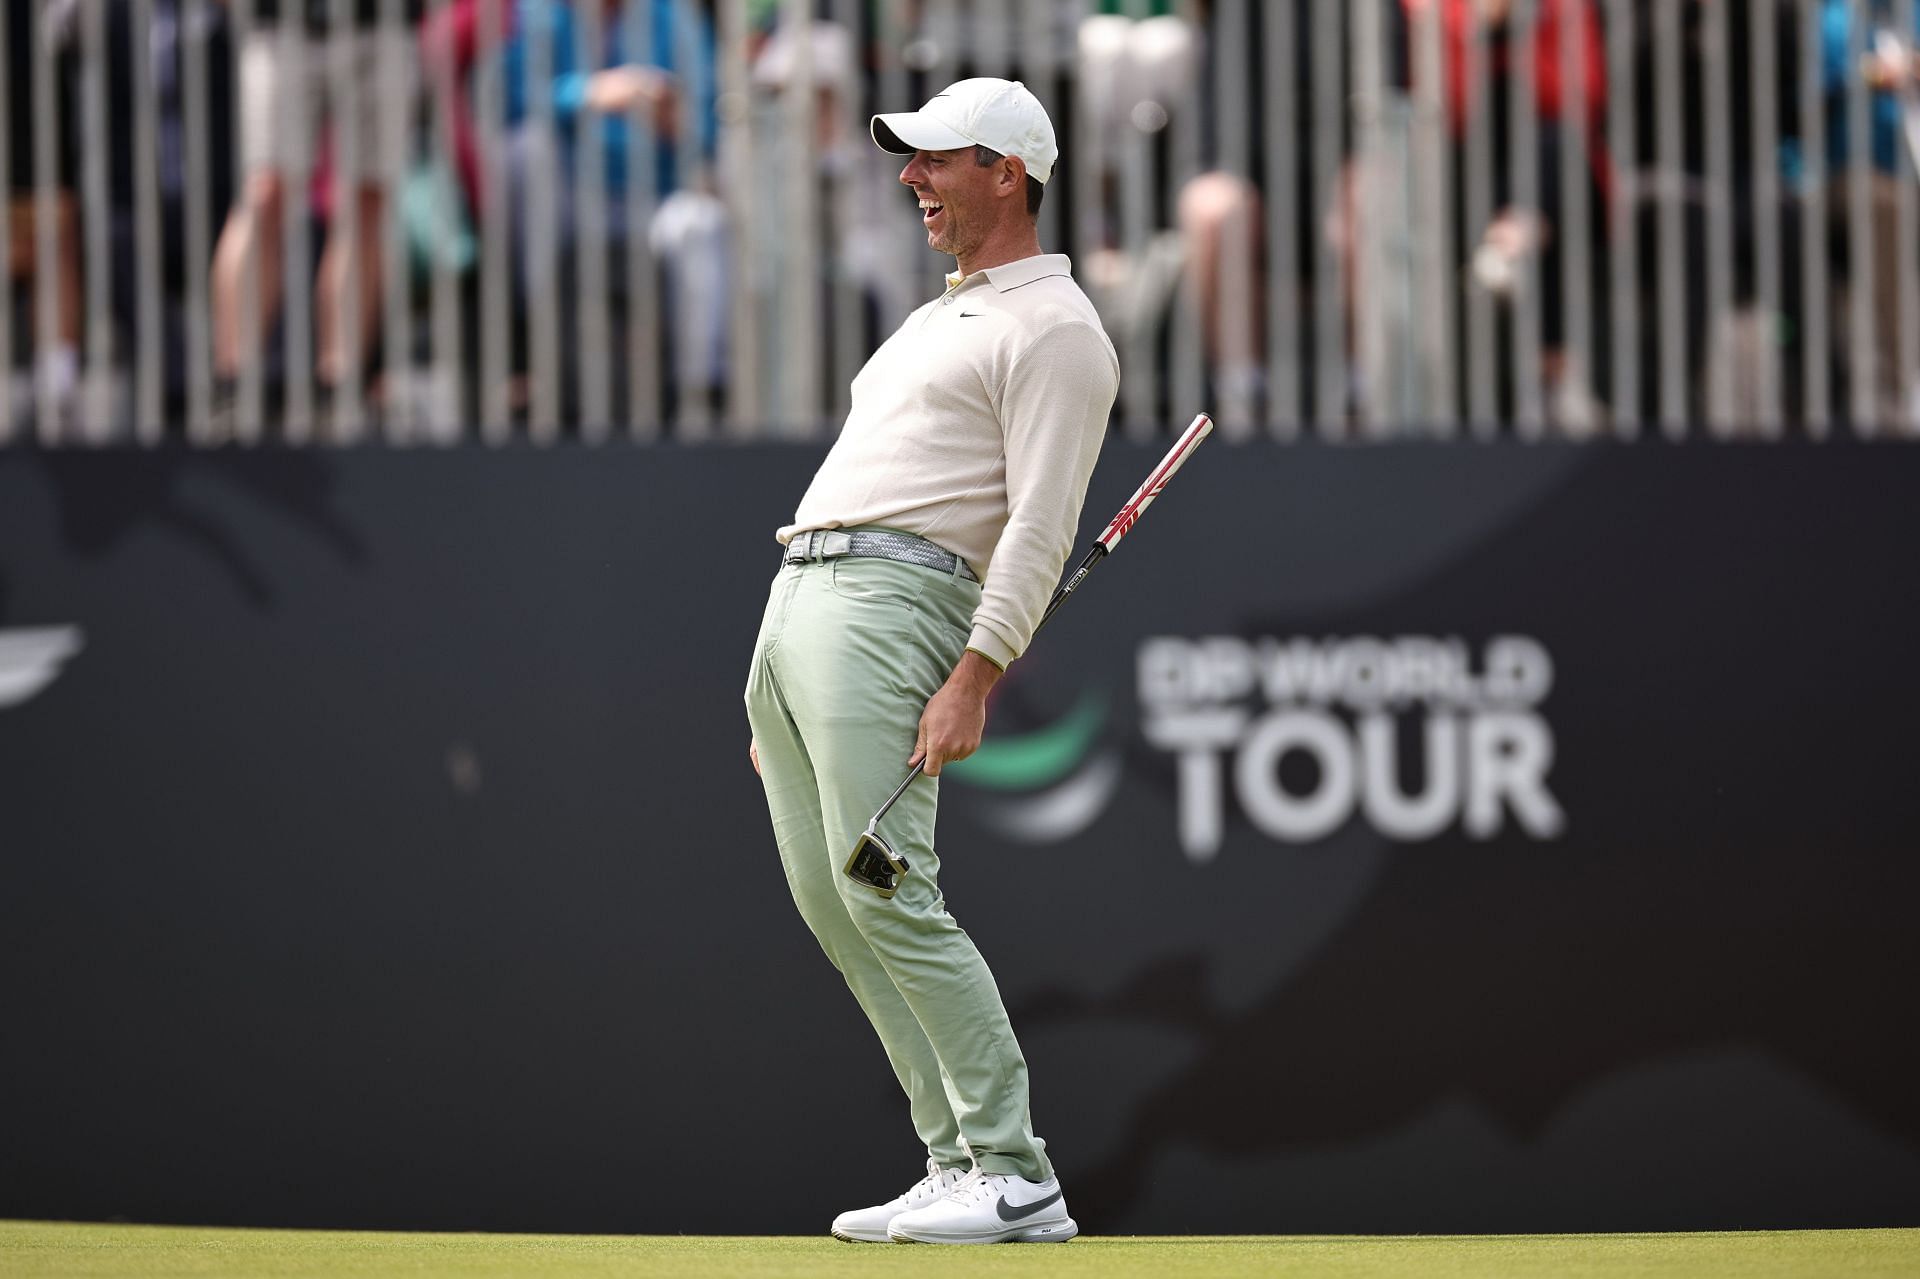 Rory McIlroy at the Genesis Scottish Open (via Getty Images)